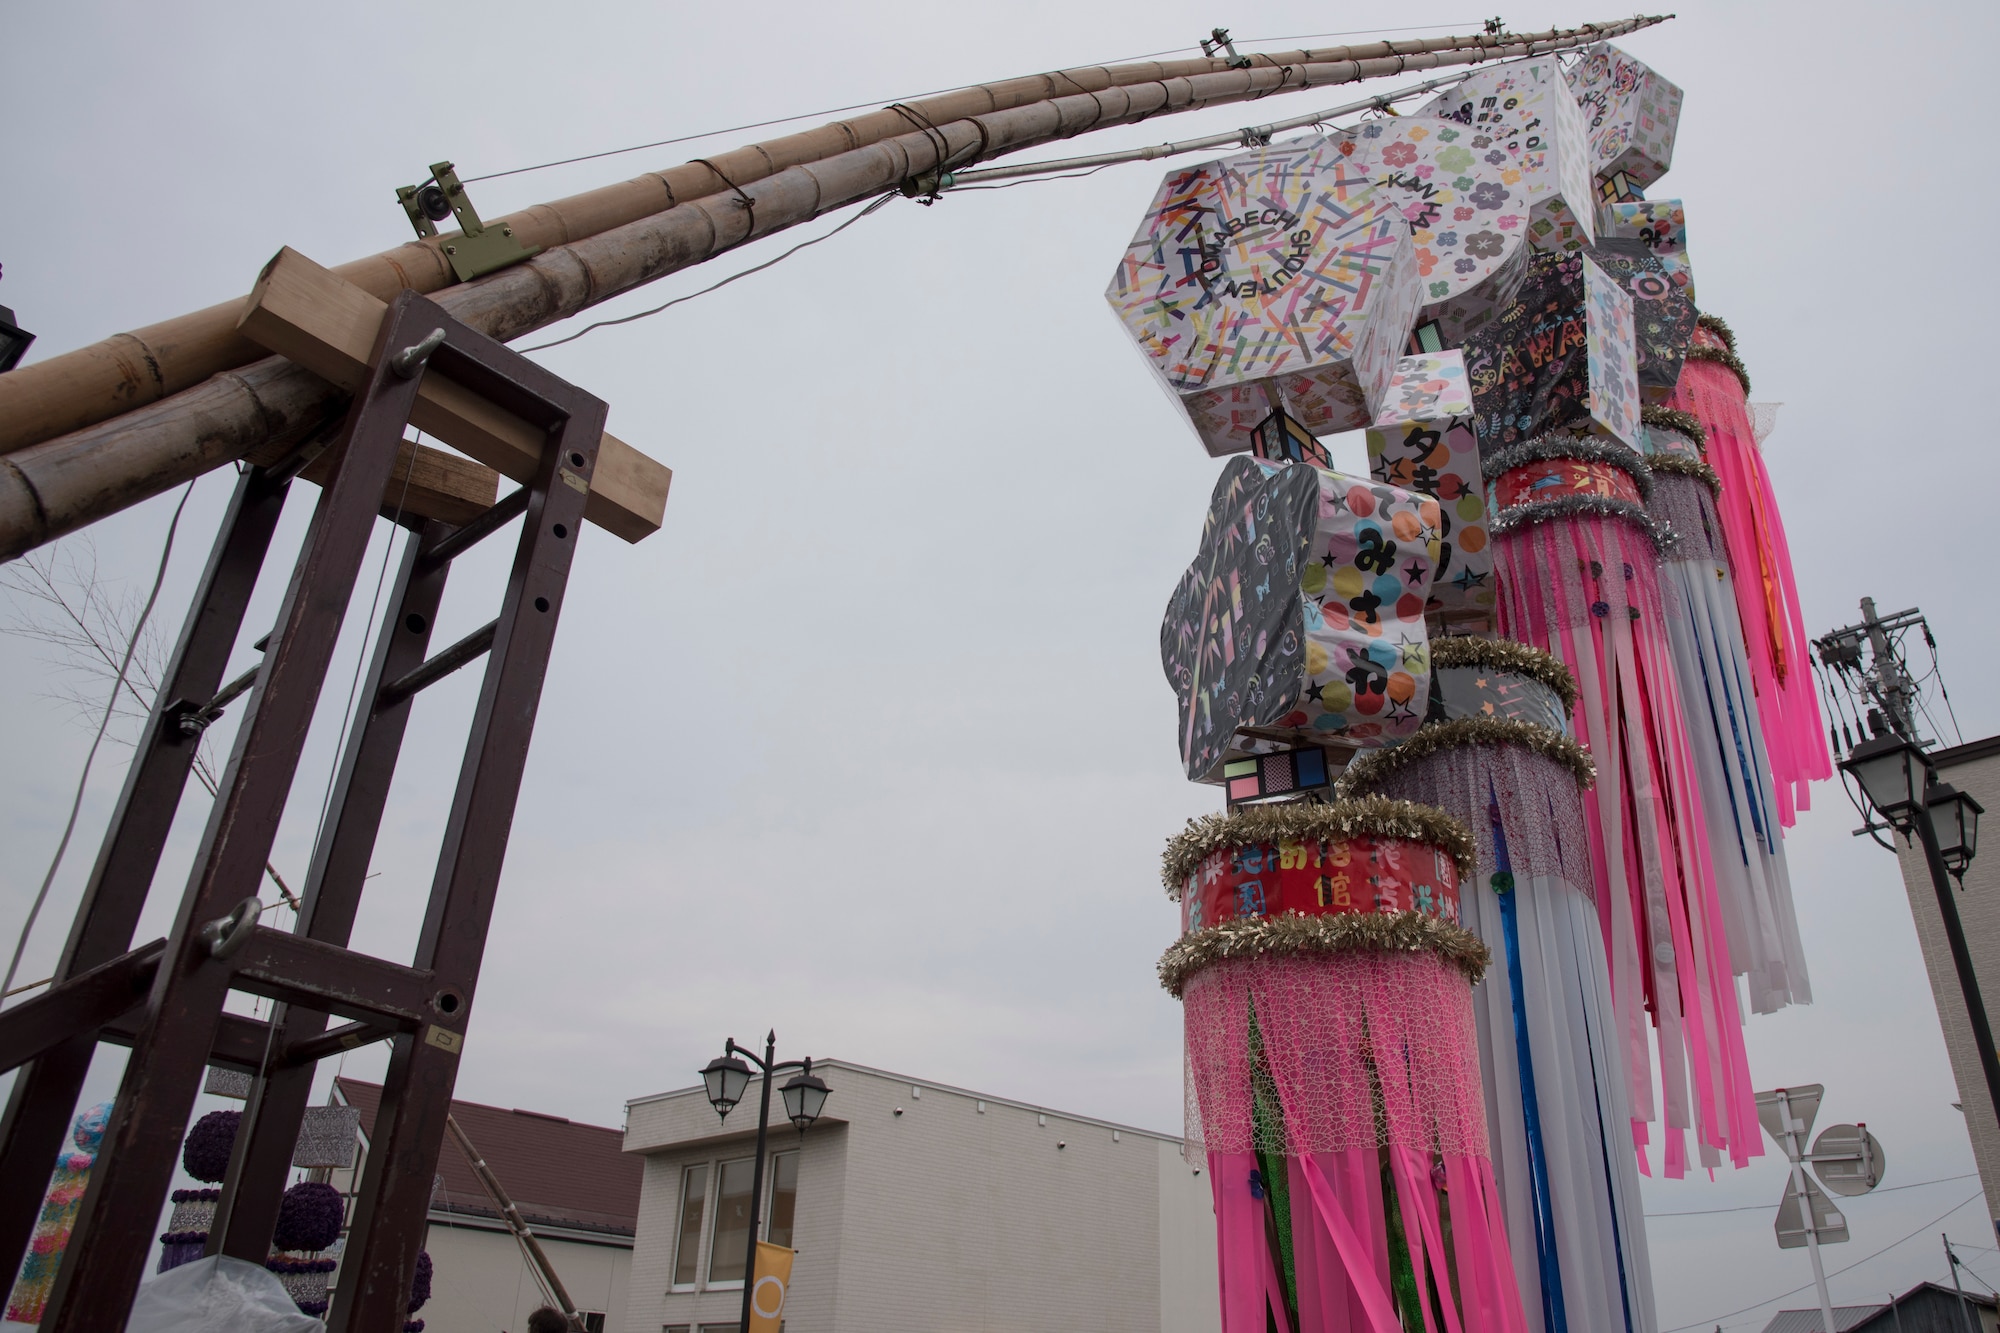 A fukinagashi streamer hangs on a bamboo post during the Tanabata Festival in Misawa City, Japan, July 26, 2019. Japan’s Tanabata “Star Festival” originated from an ancient Chinese legend about two lovers -- Princess Orihime, the Vega star -- who weaved clouds, and Hikoboshi, the Altair star, a cattle herder. (U.S. Air Force photo by Branden Yamada)